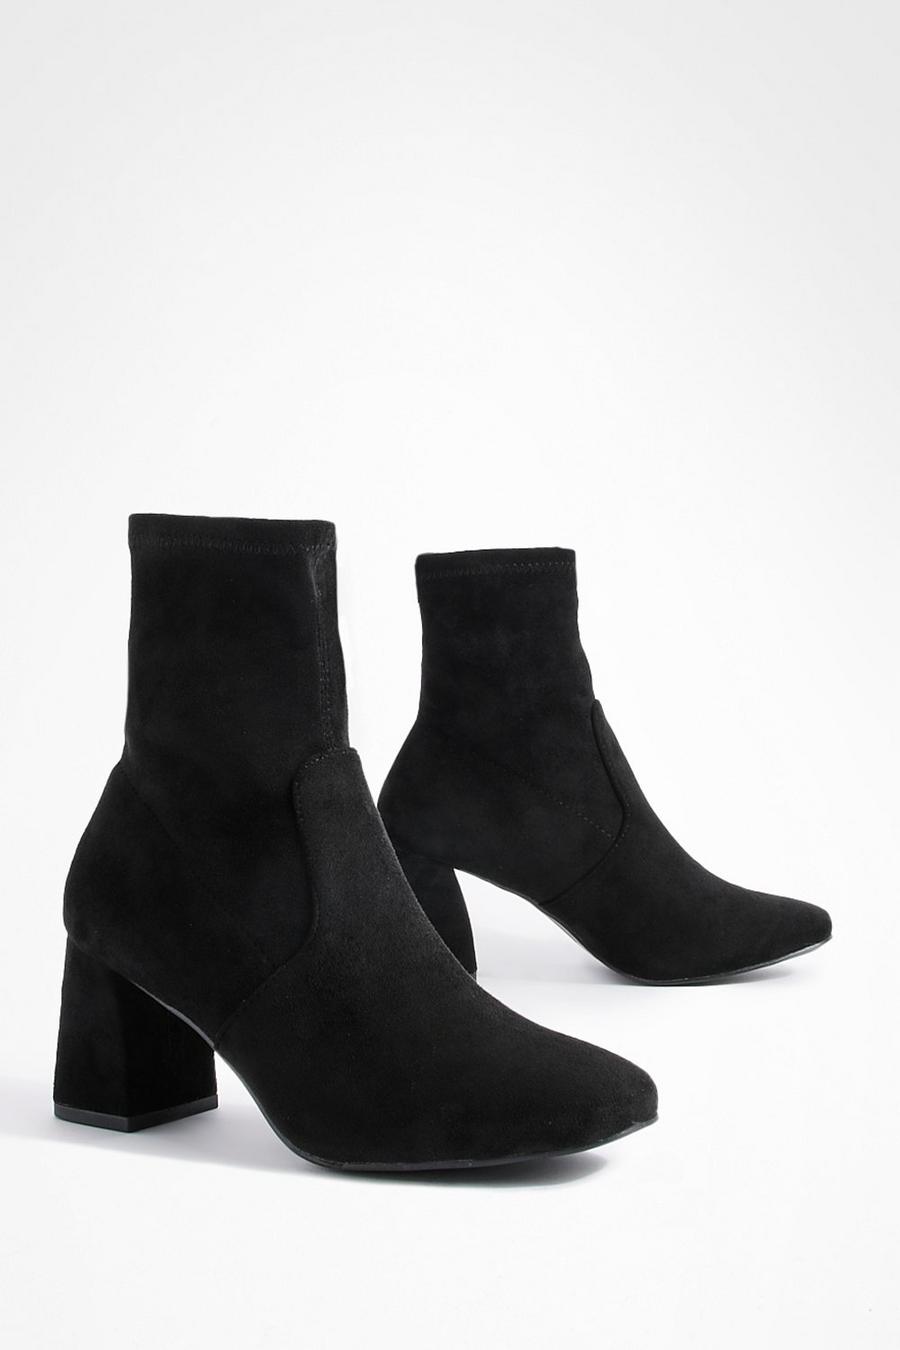 Black Wide Fit Square Toe Block Heeled Boots